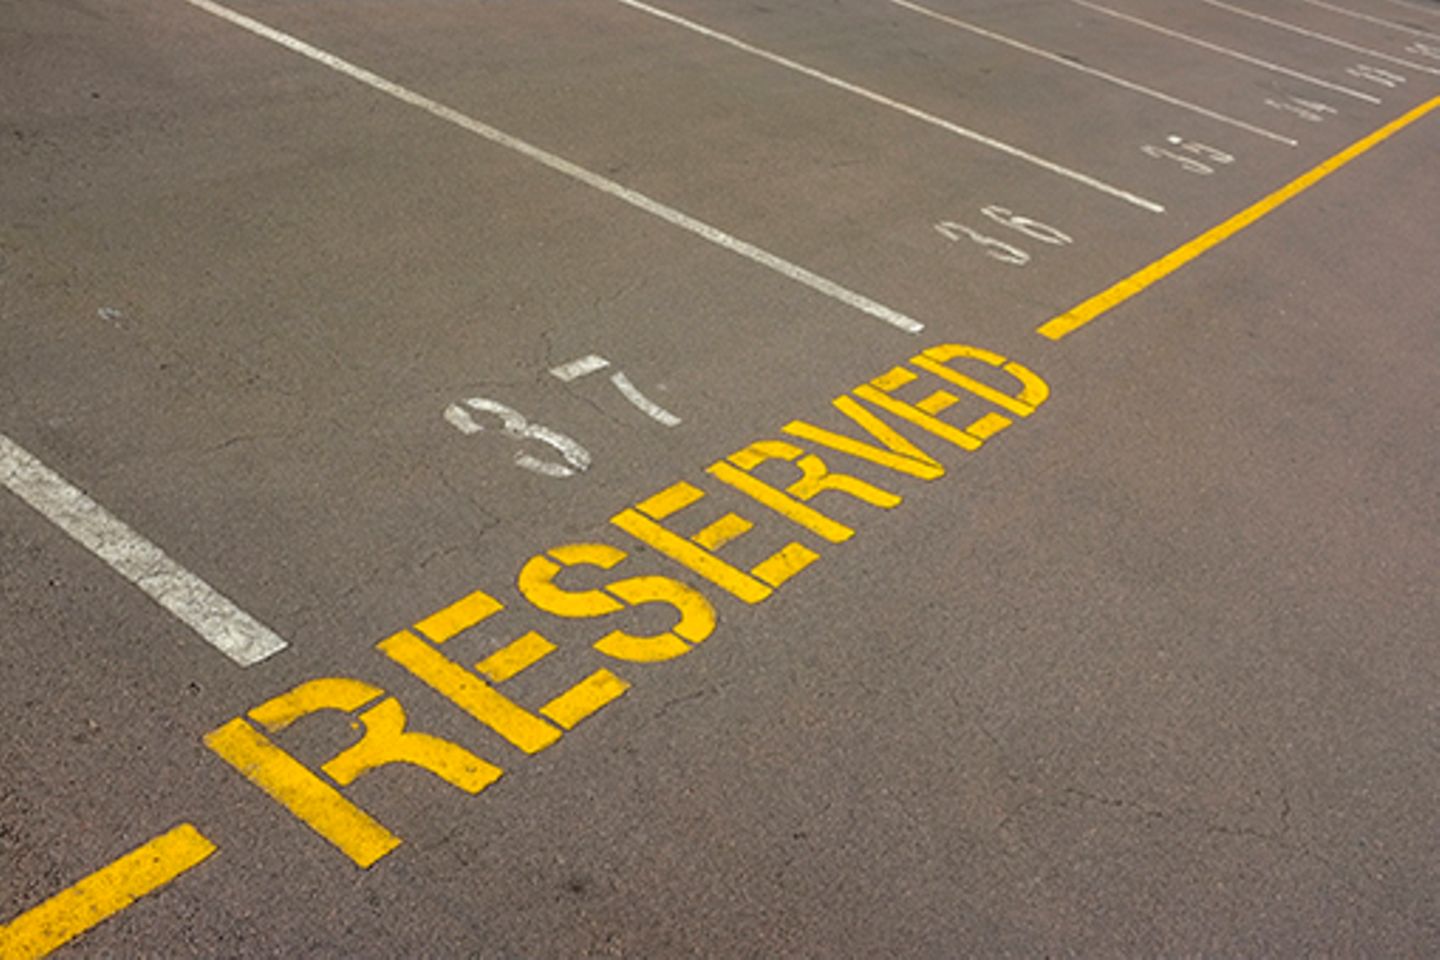 Photo of empty parking spaces, one with the inscription "reserved".